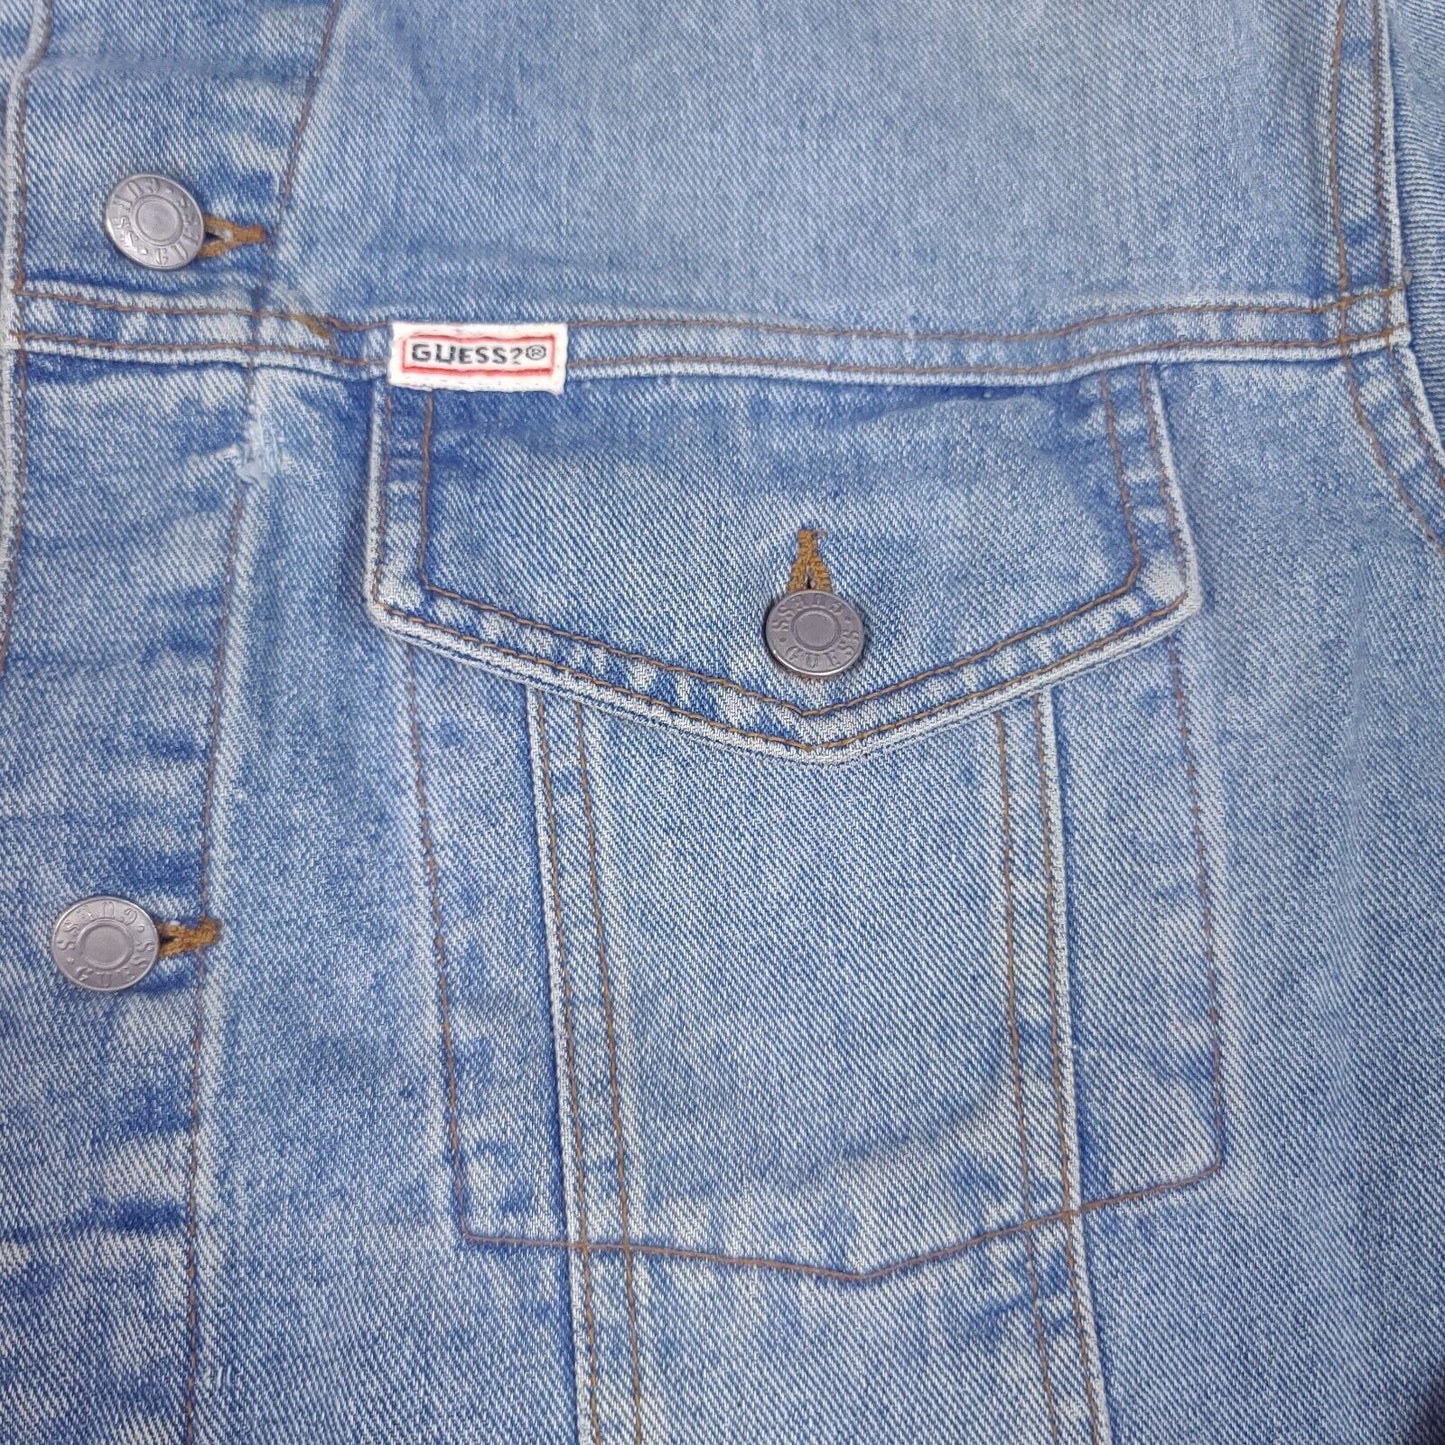 Guess Georges Marciano Blue Denim Jacket